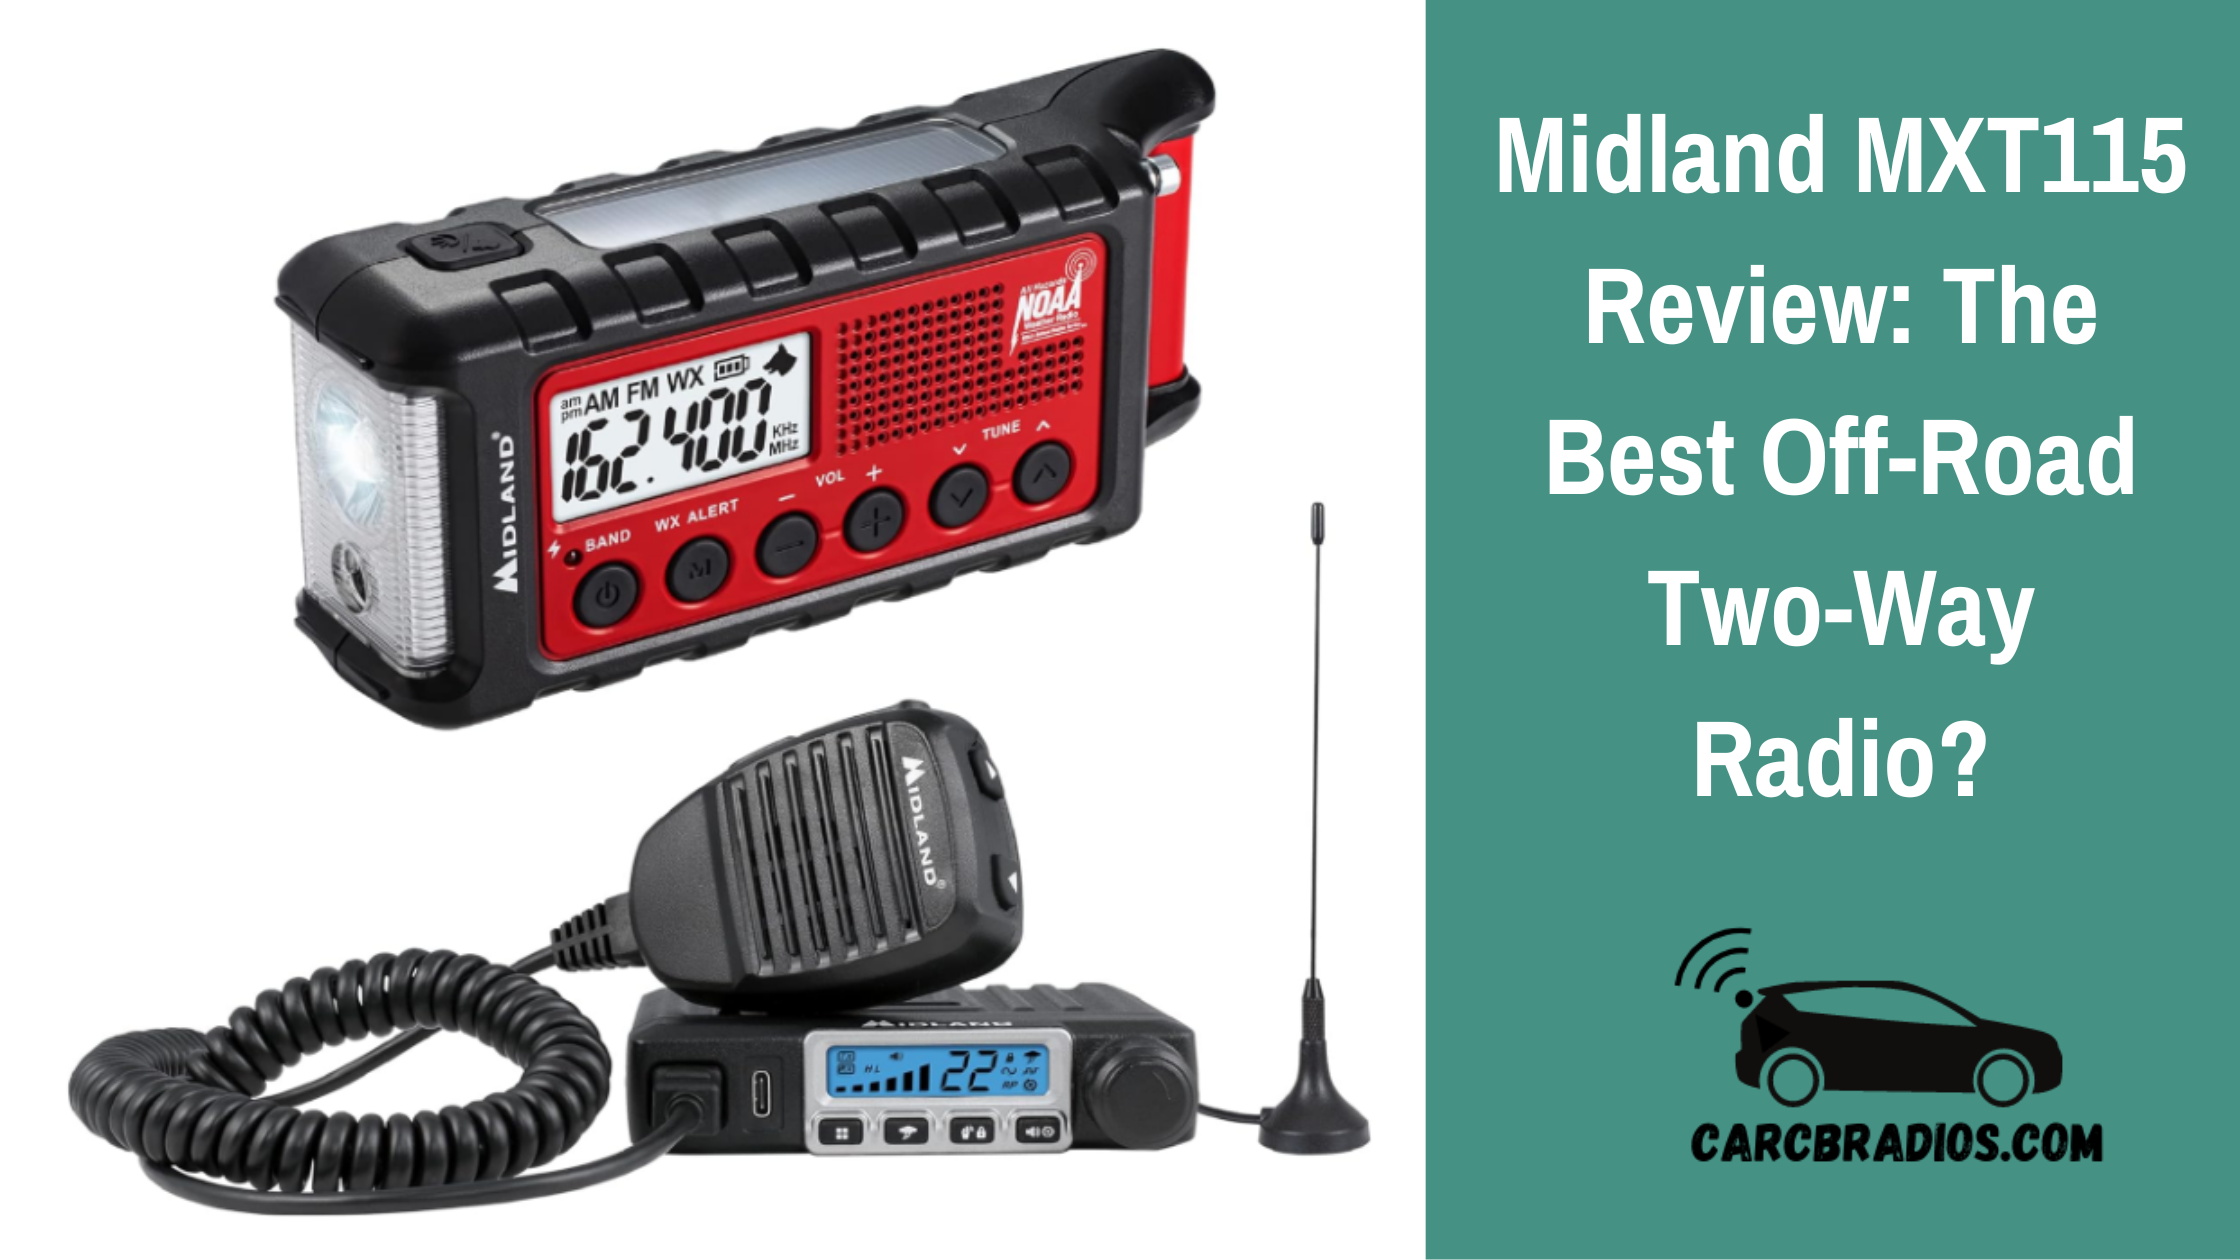 If you're looking for a reliable and versatile two-way radio, the Midland MXT115 is a great option. This 15-Watt MicroMobile device operates on GMRS frequencies, which are licensed by the FCC for personal and business use. With 15 high/low power channels, you can expect a clear communication over a longer range. The channel scan feature allows you to search for active channels in your area.